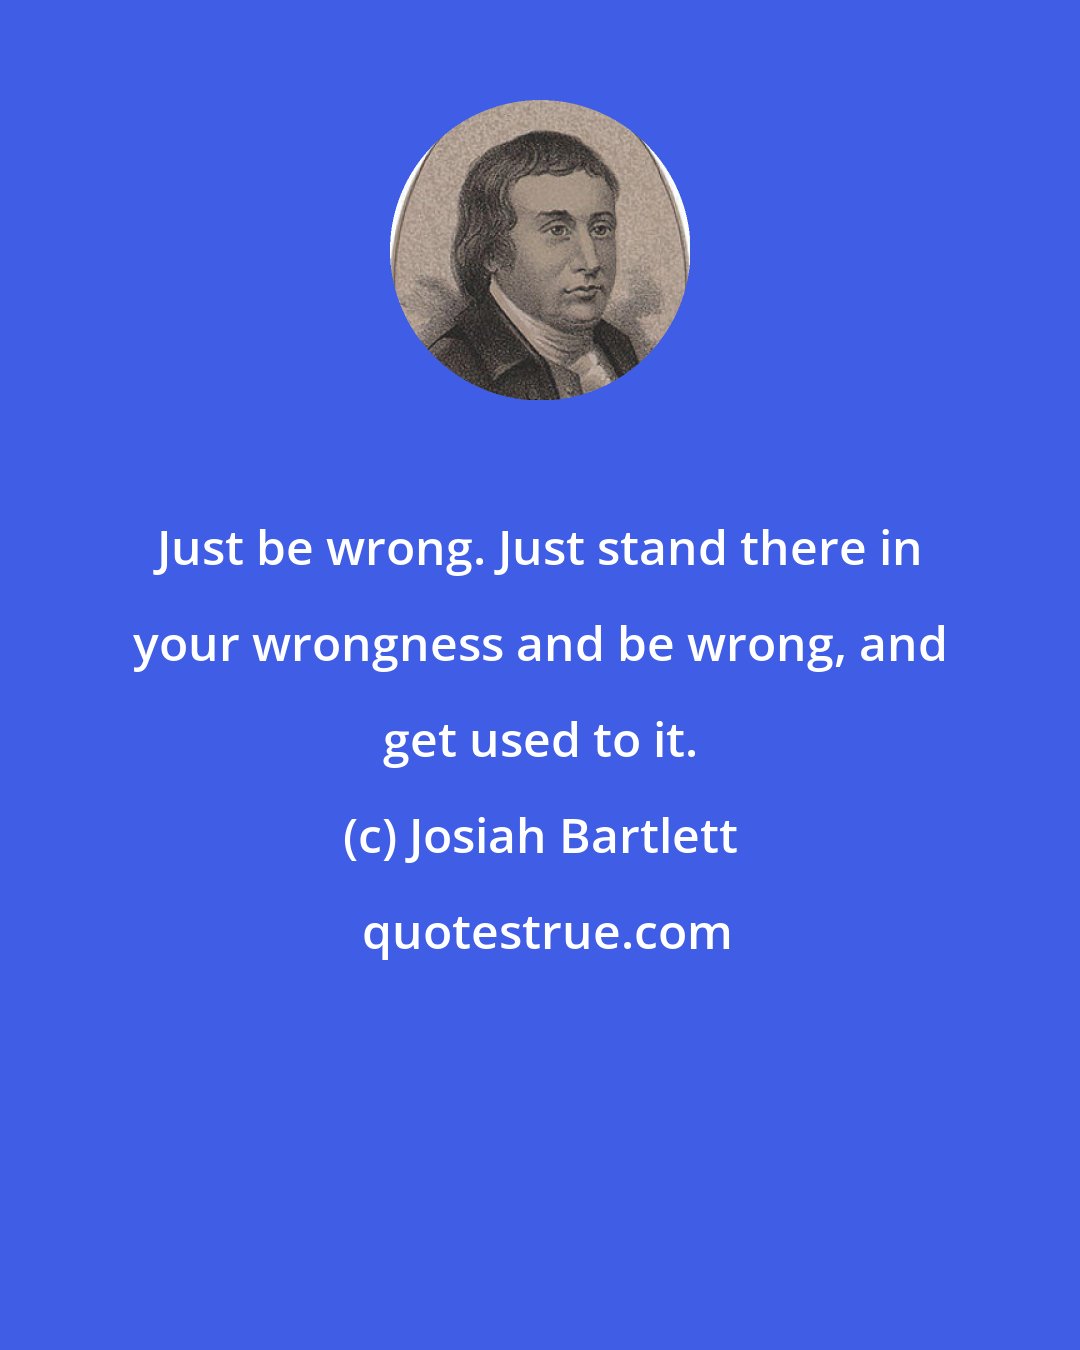 Josiah Bartlett: Just be wrong. Just stand there in your wrongness and be wrong, and get used to it.